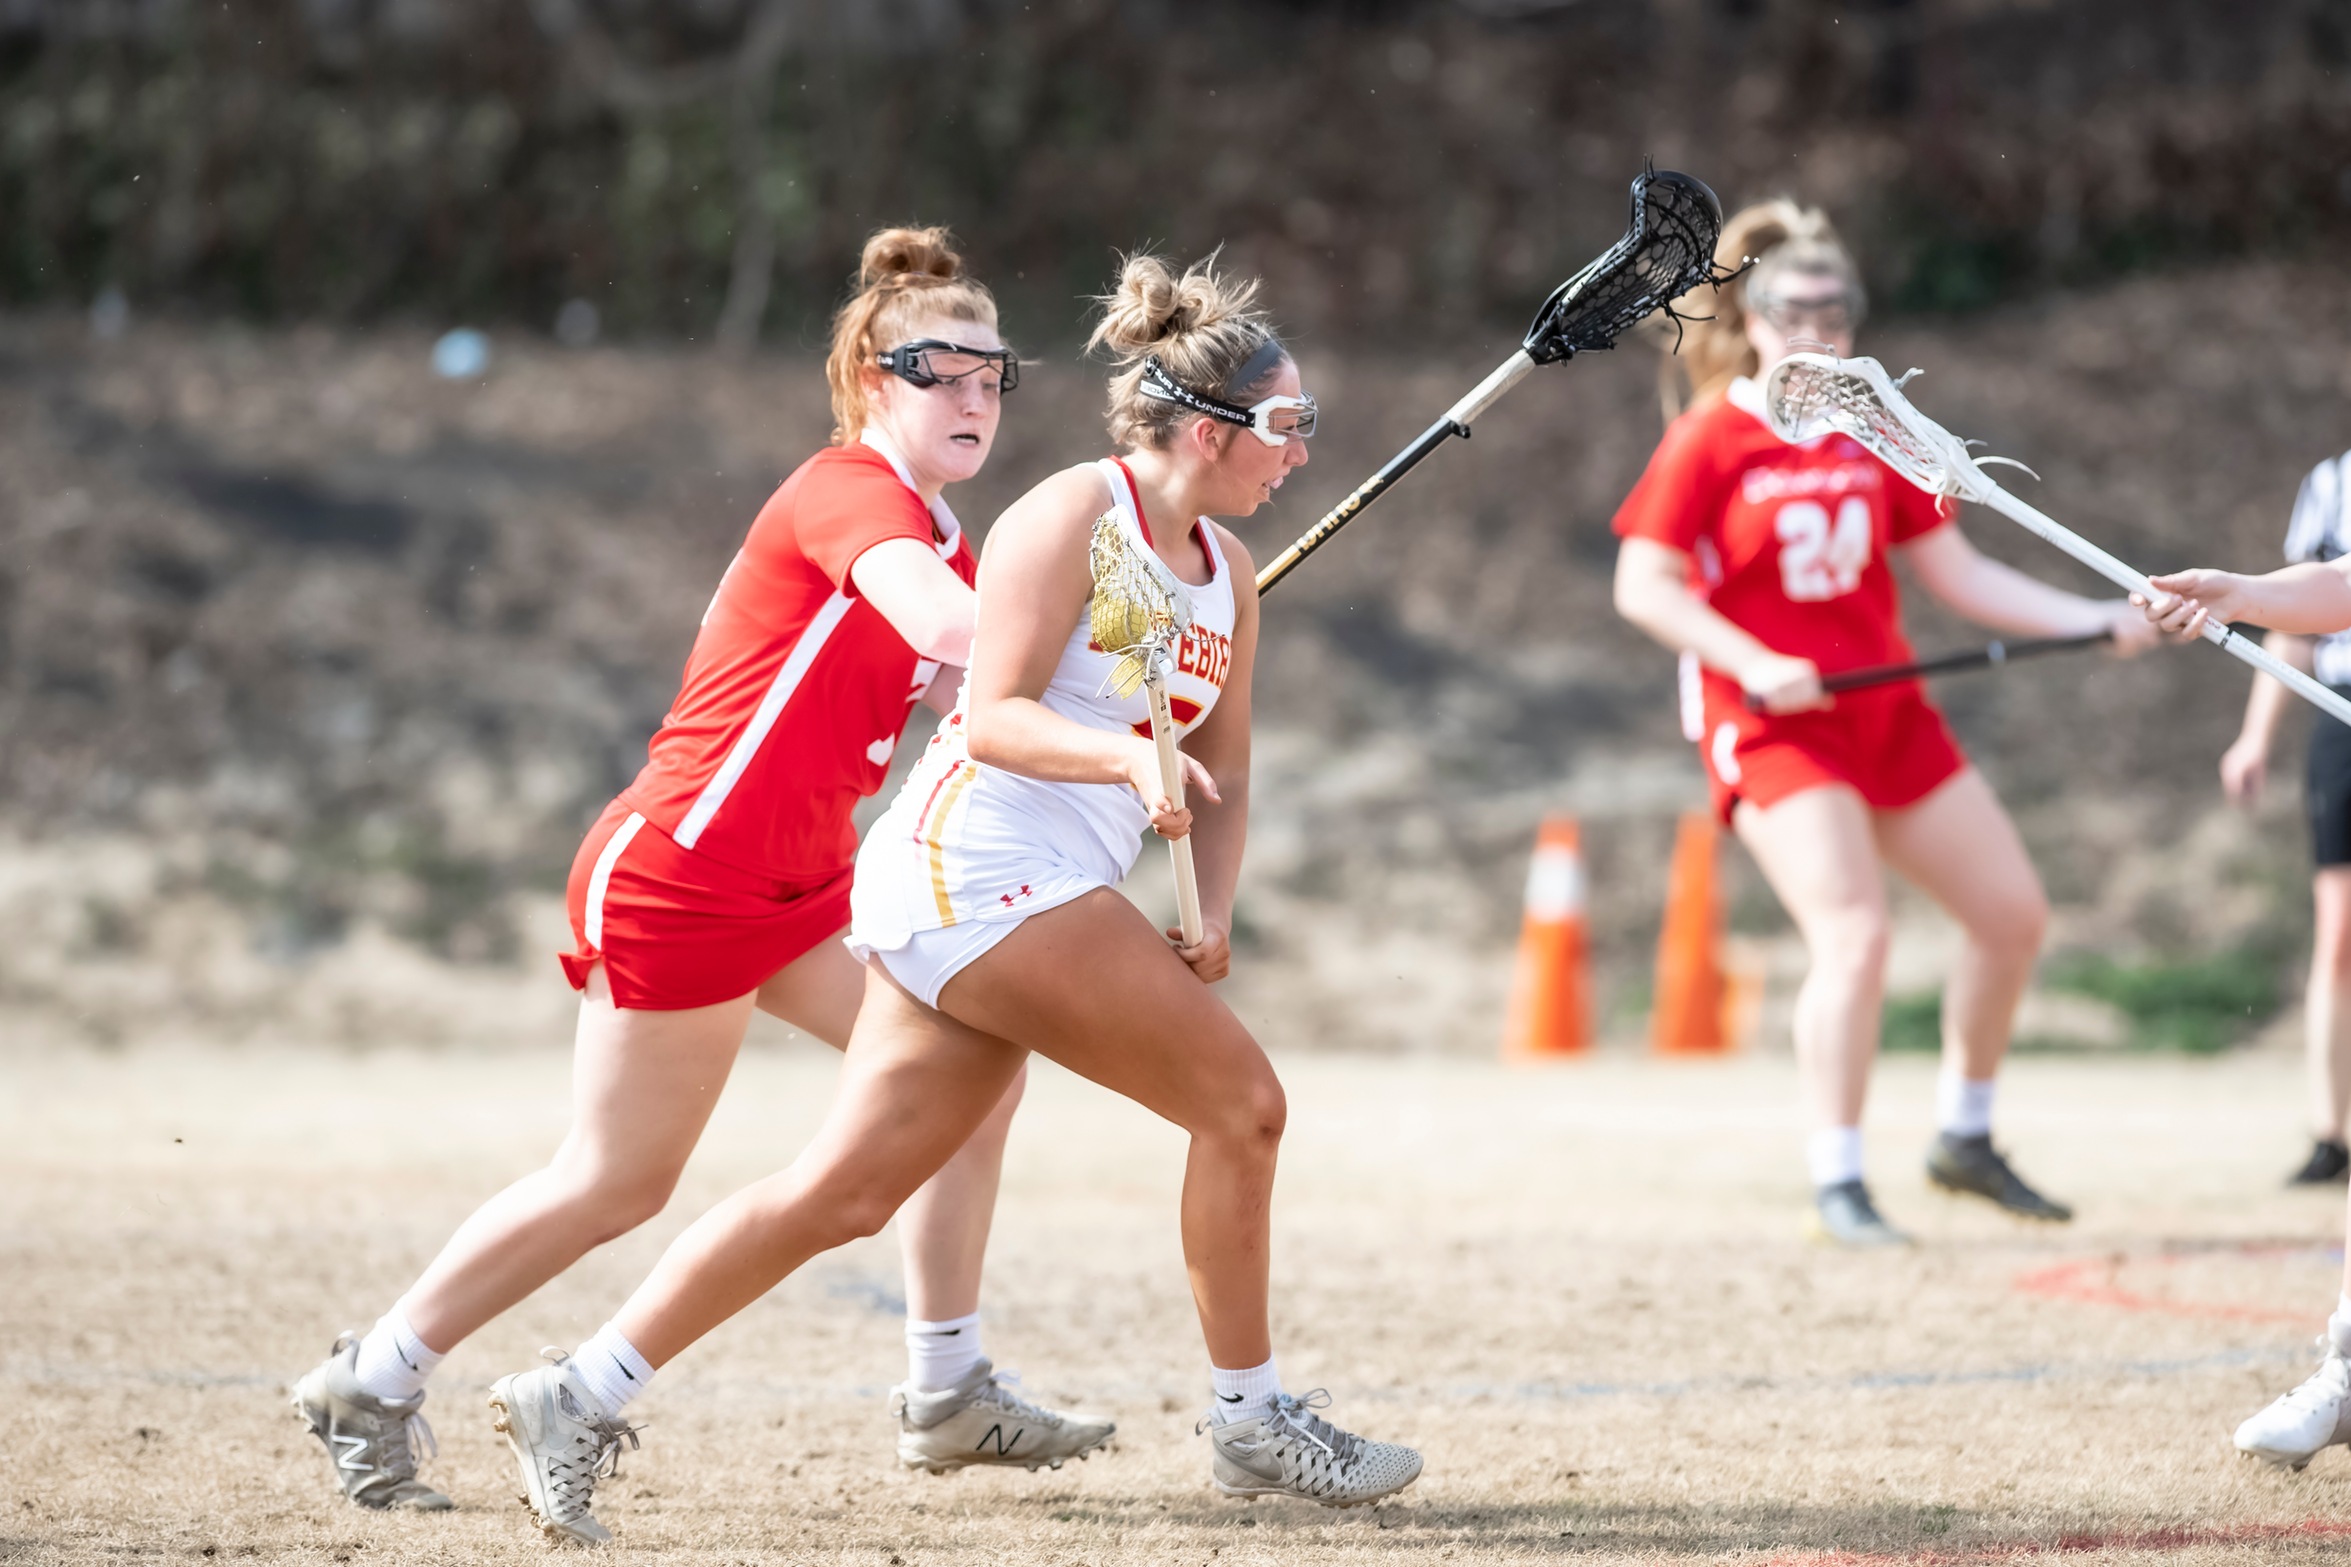 Schamens had seven points off four goals and three assists. She also had a game-high 12 ground balls and two caused turnovers.